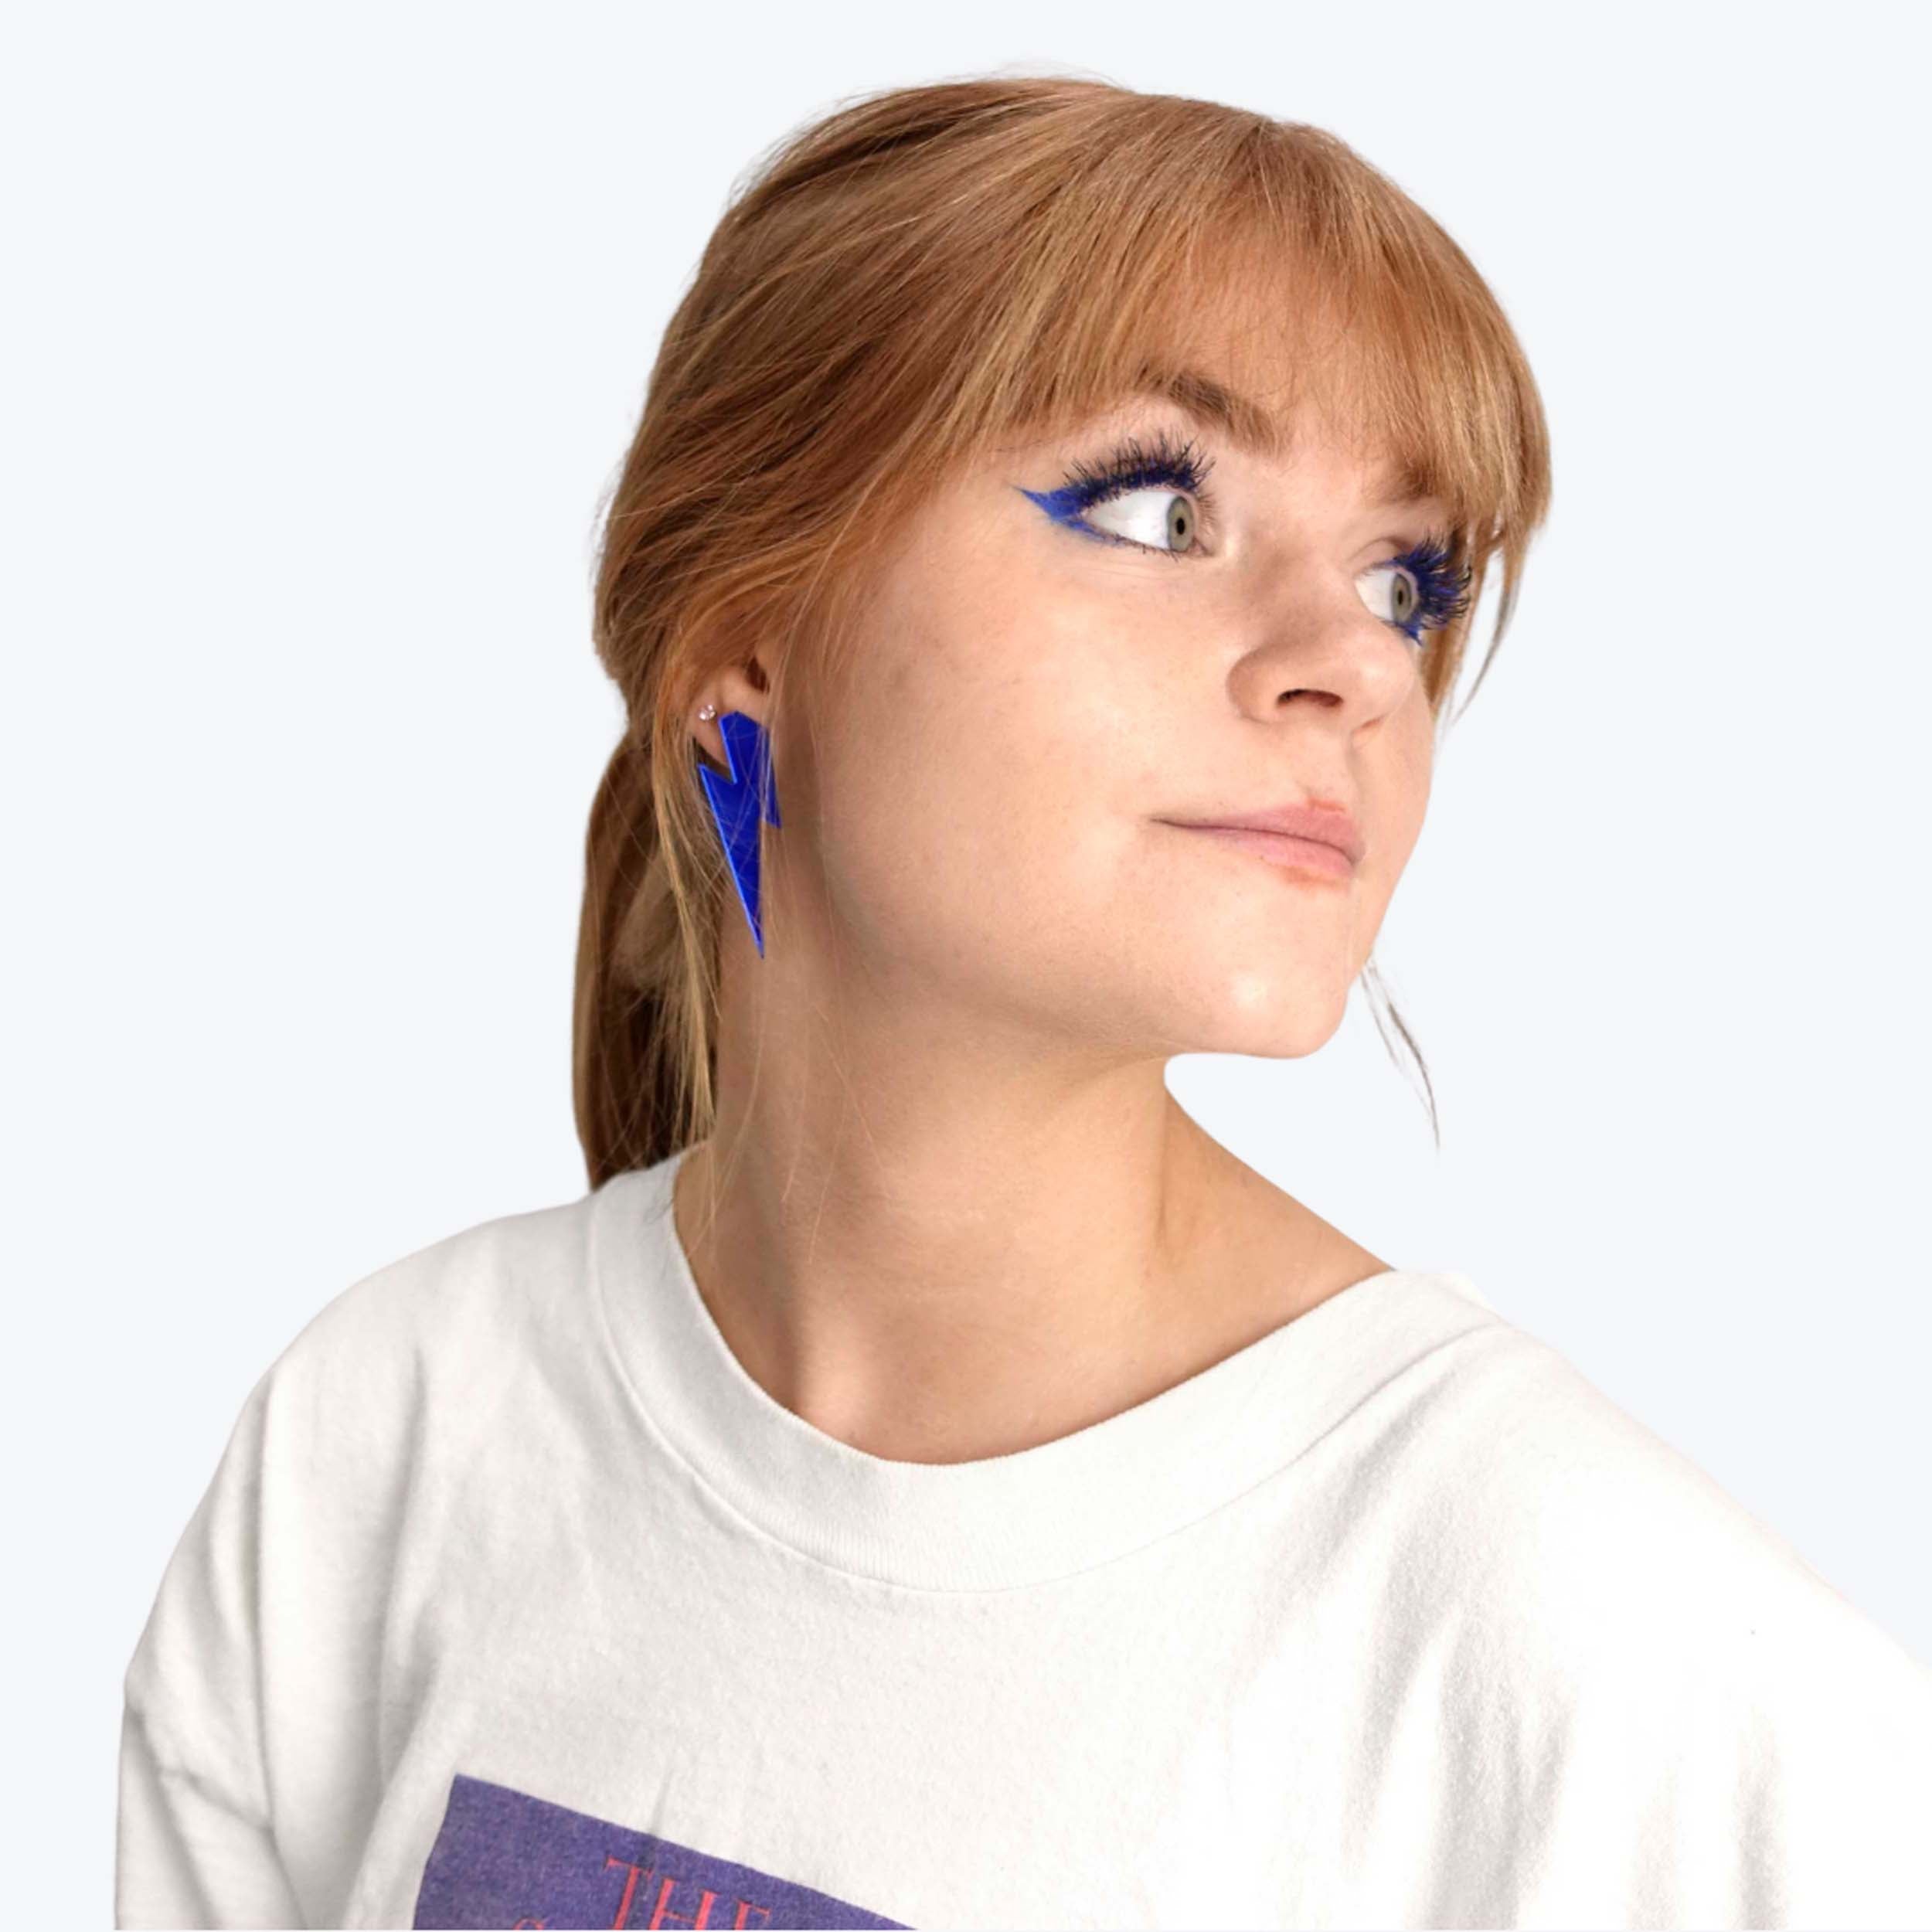 Eliza wears electric blue Lightning Bolt earrings designed by Sarah Day for Wear and Resist. 